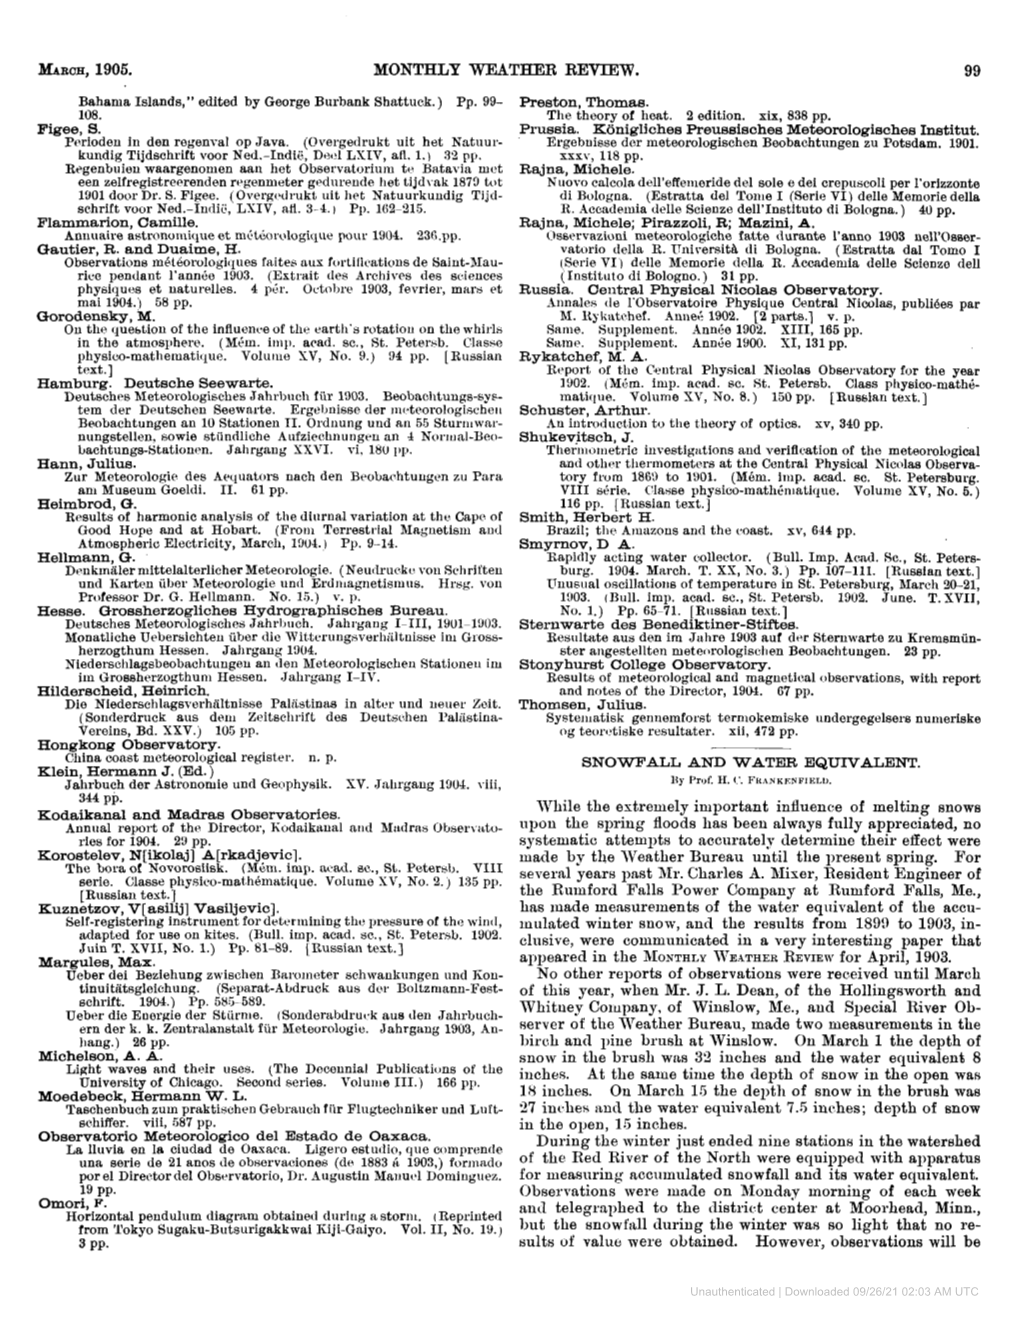 March, 1905. Monthly Weather Review